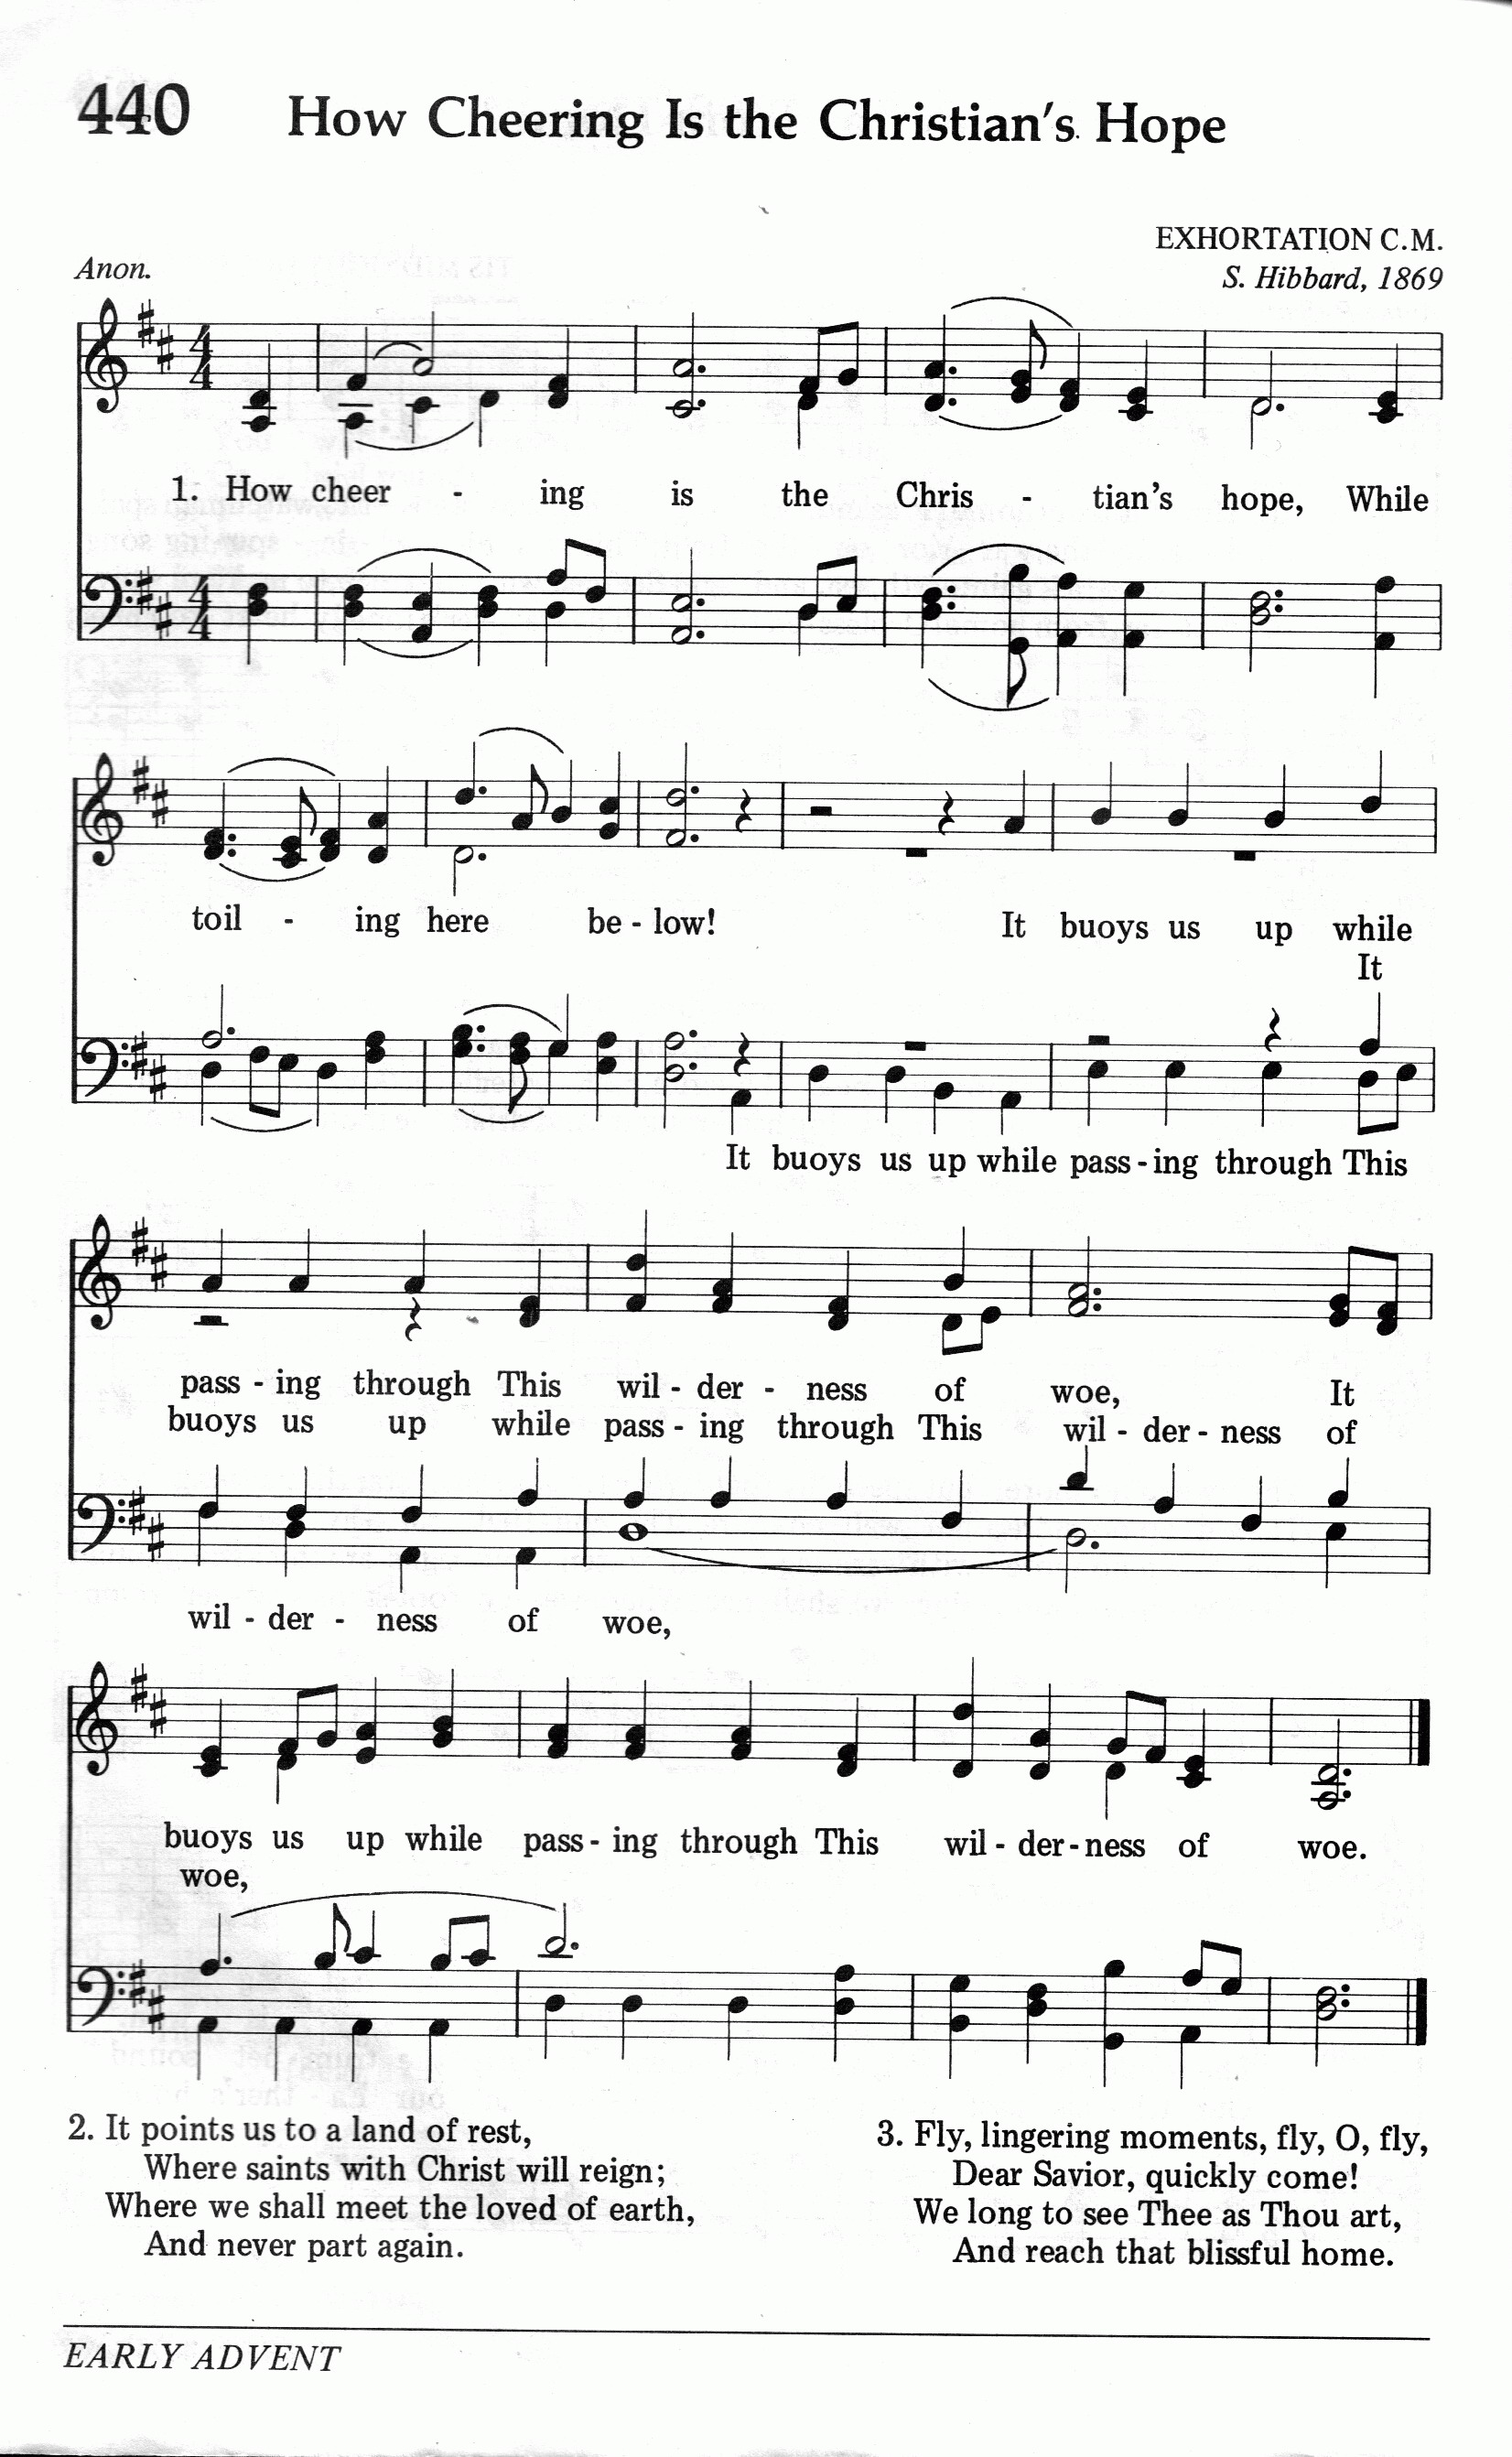 440.How Cheering Is the Christian's Hope-695HYMN